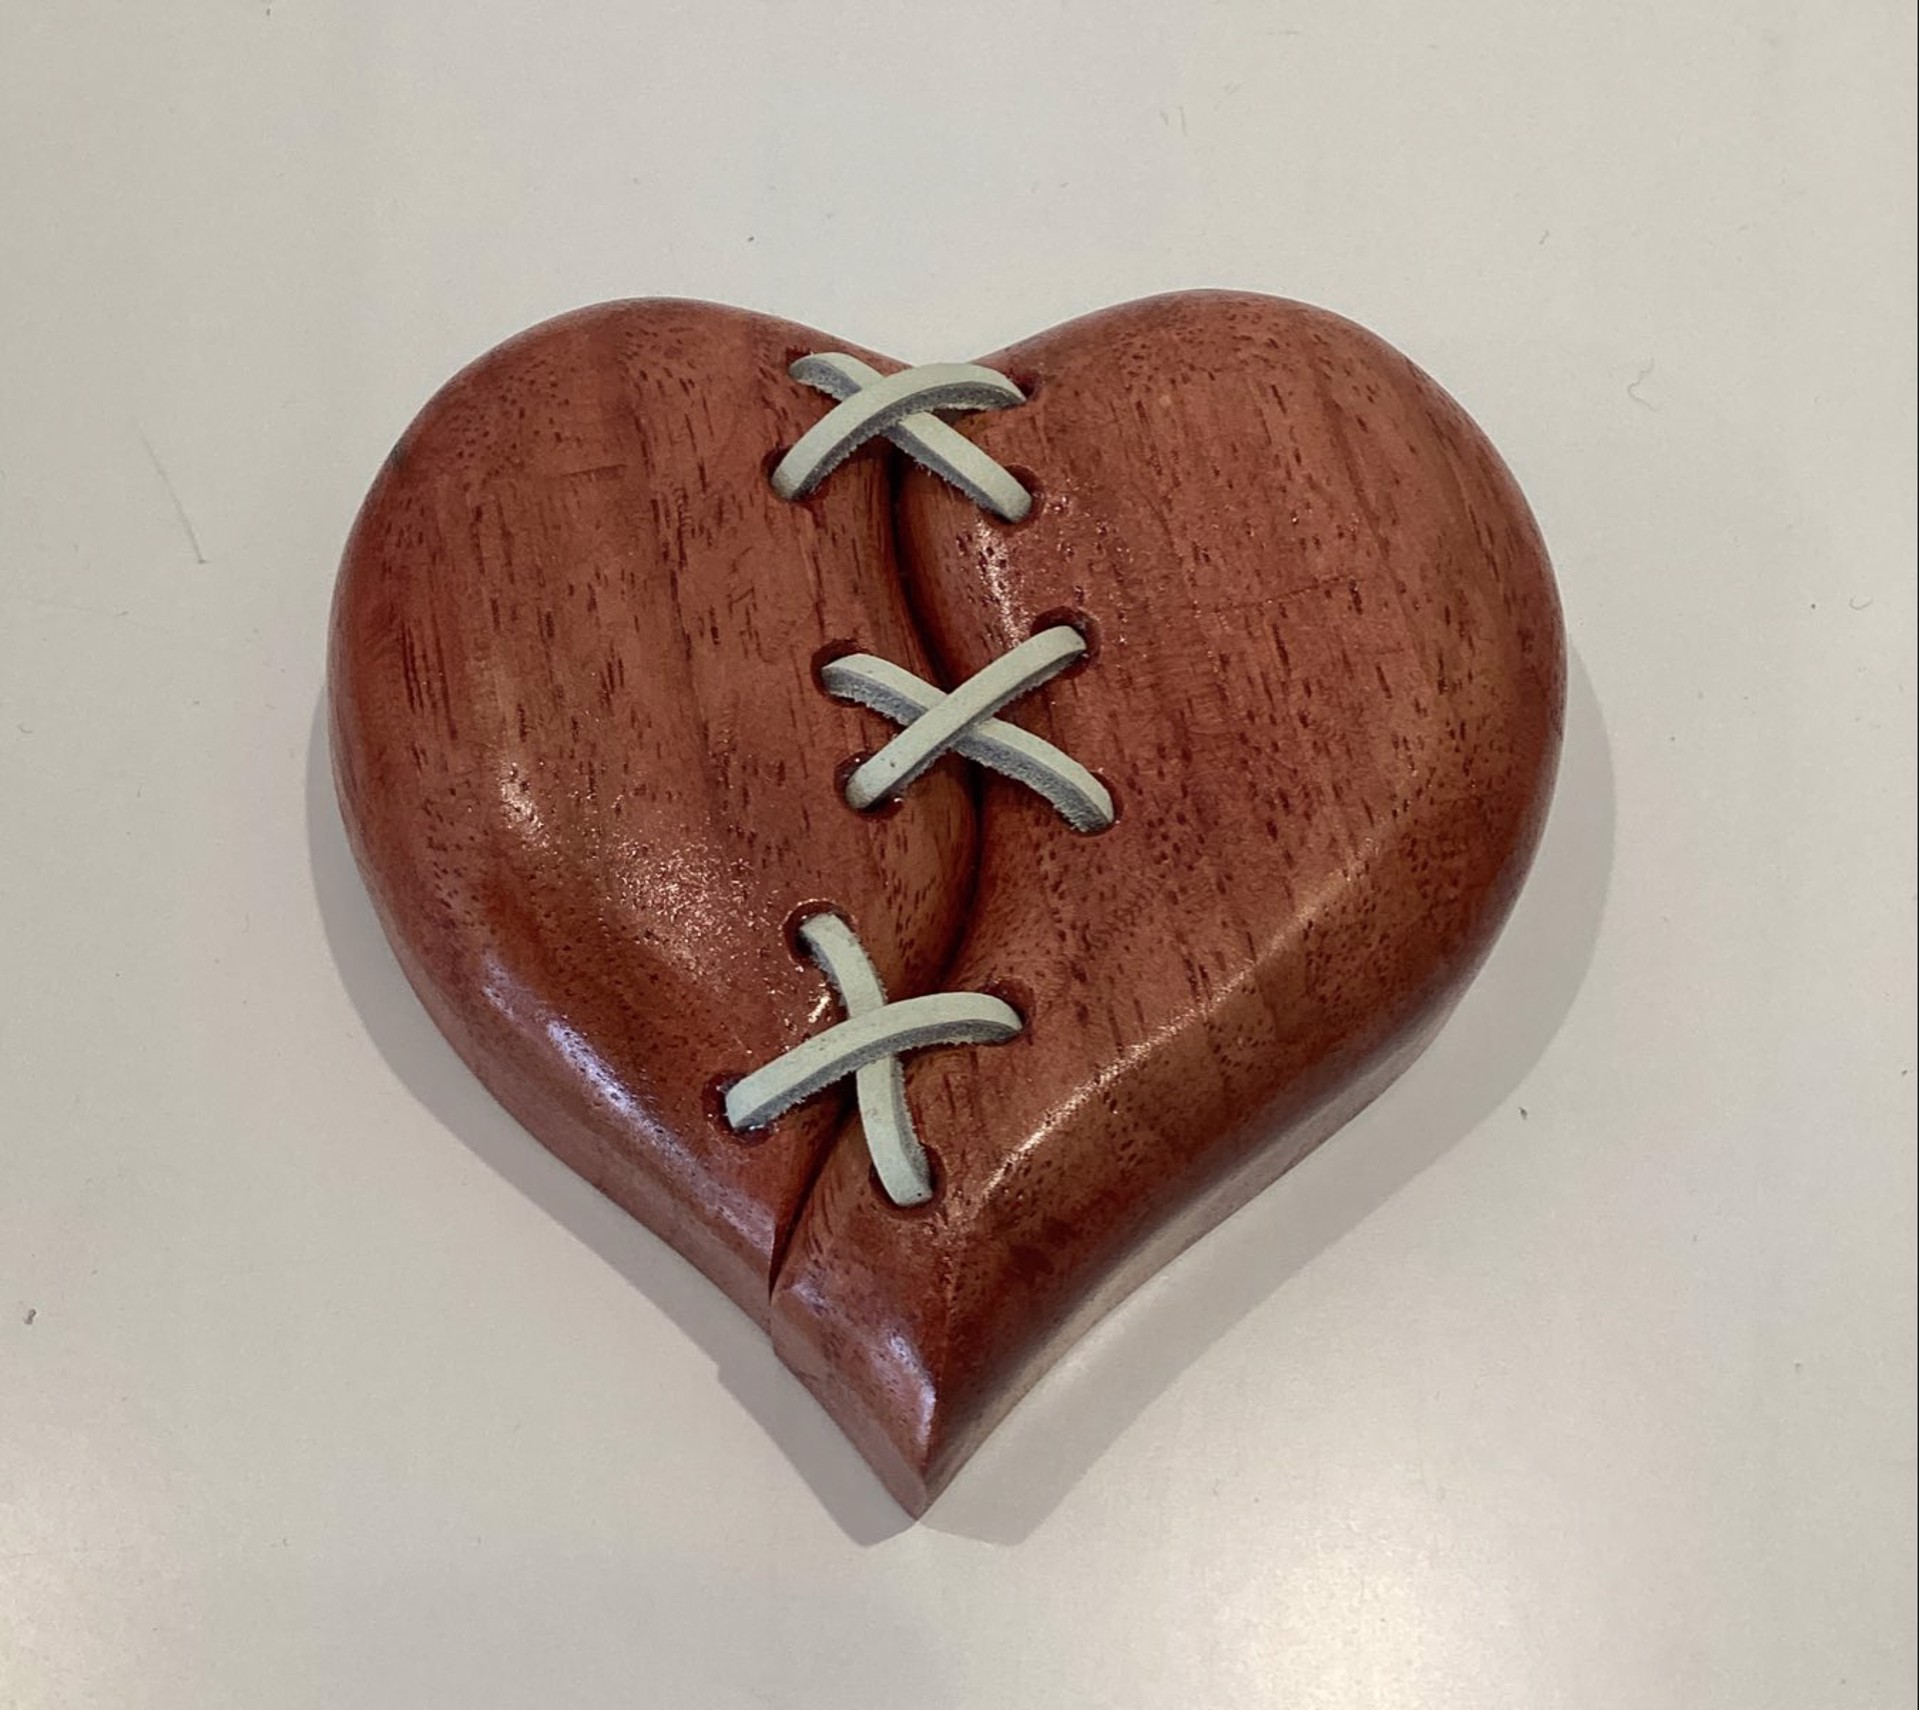 Mended Broken Heart With Leather by Mel Johnson